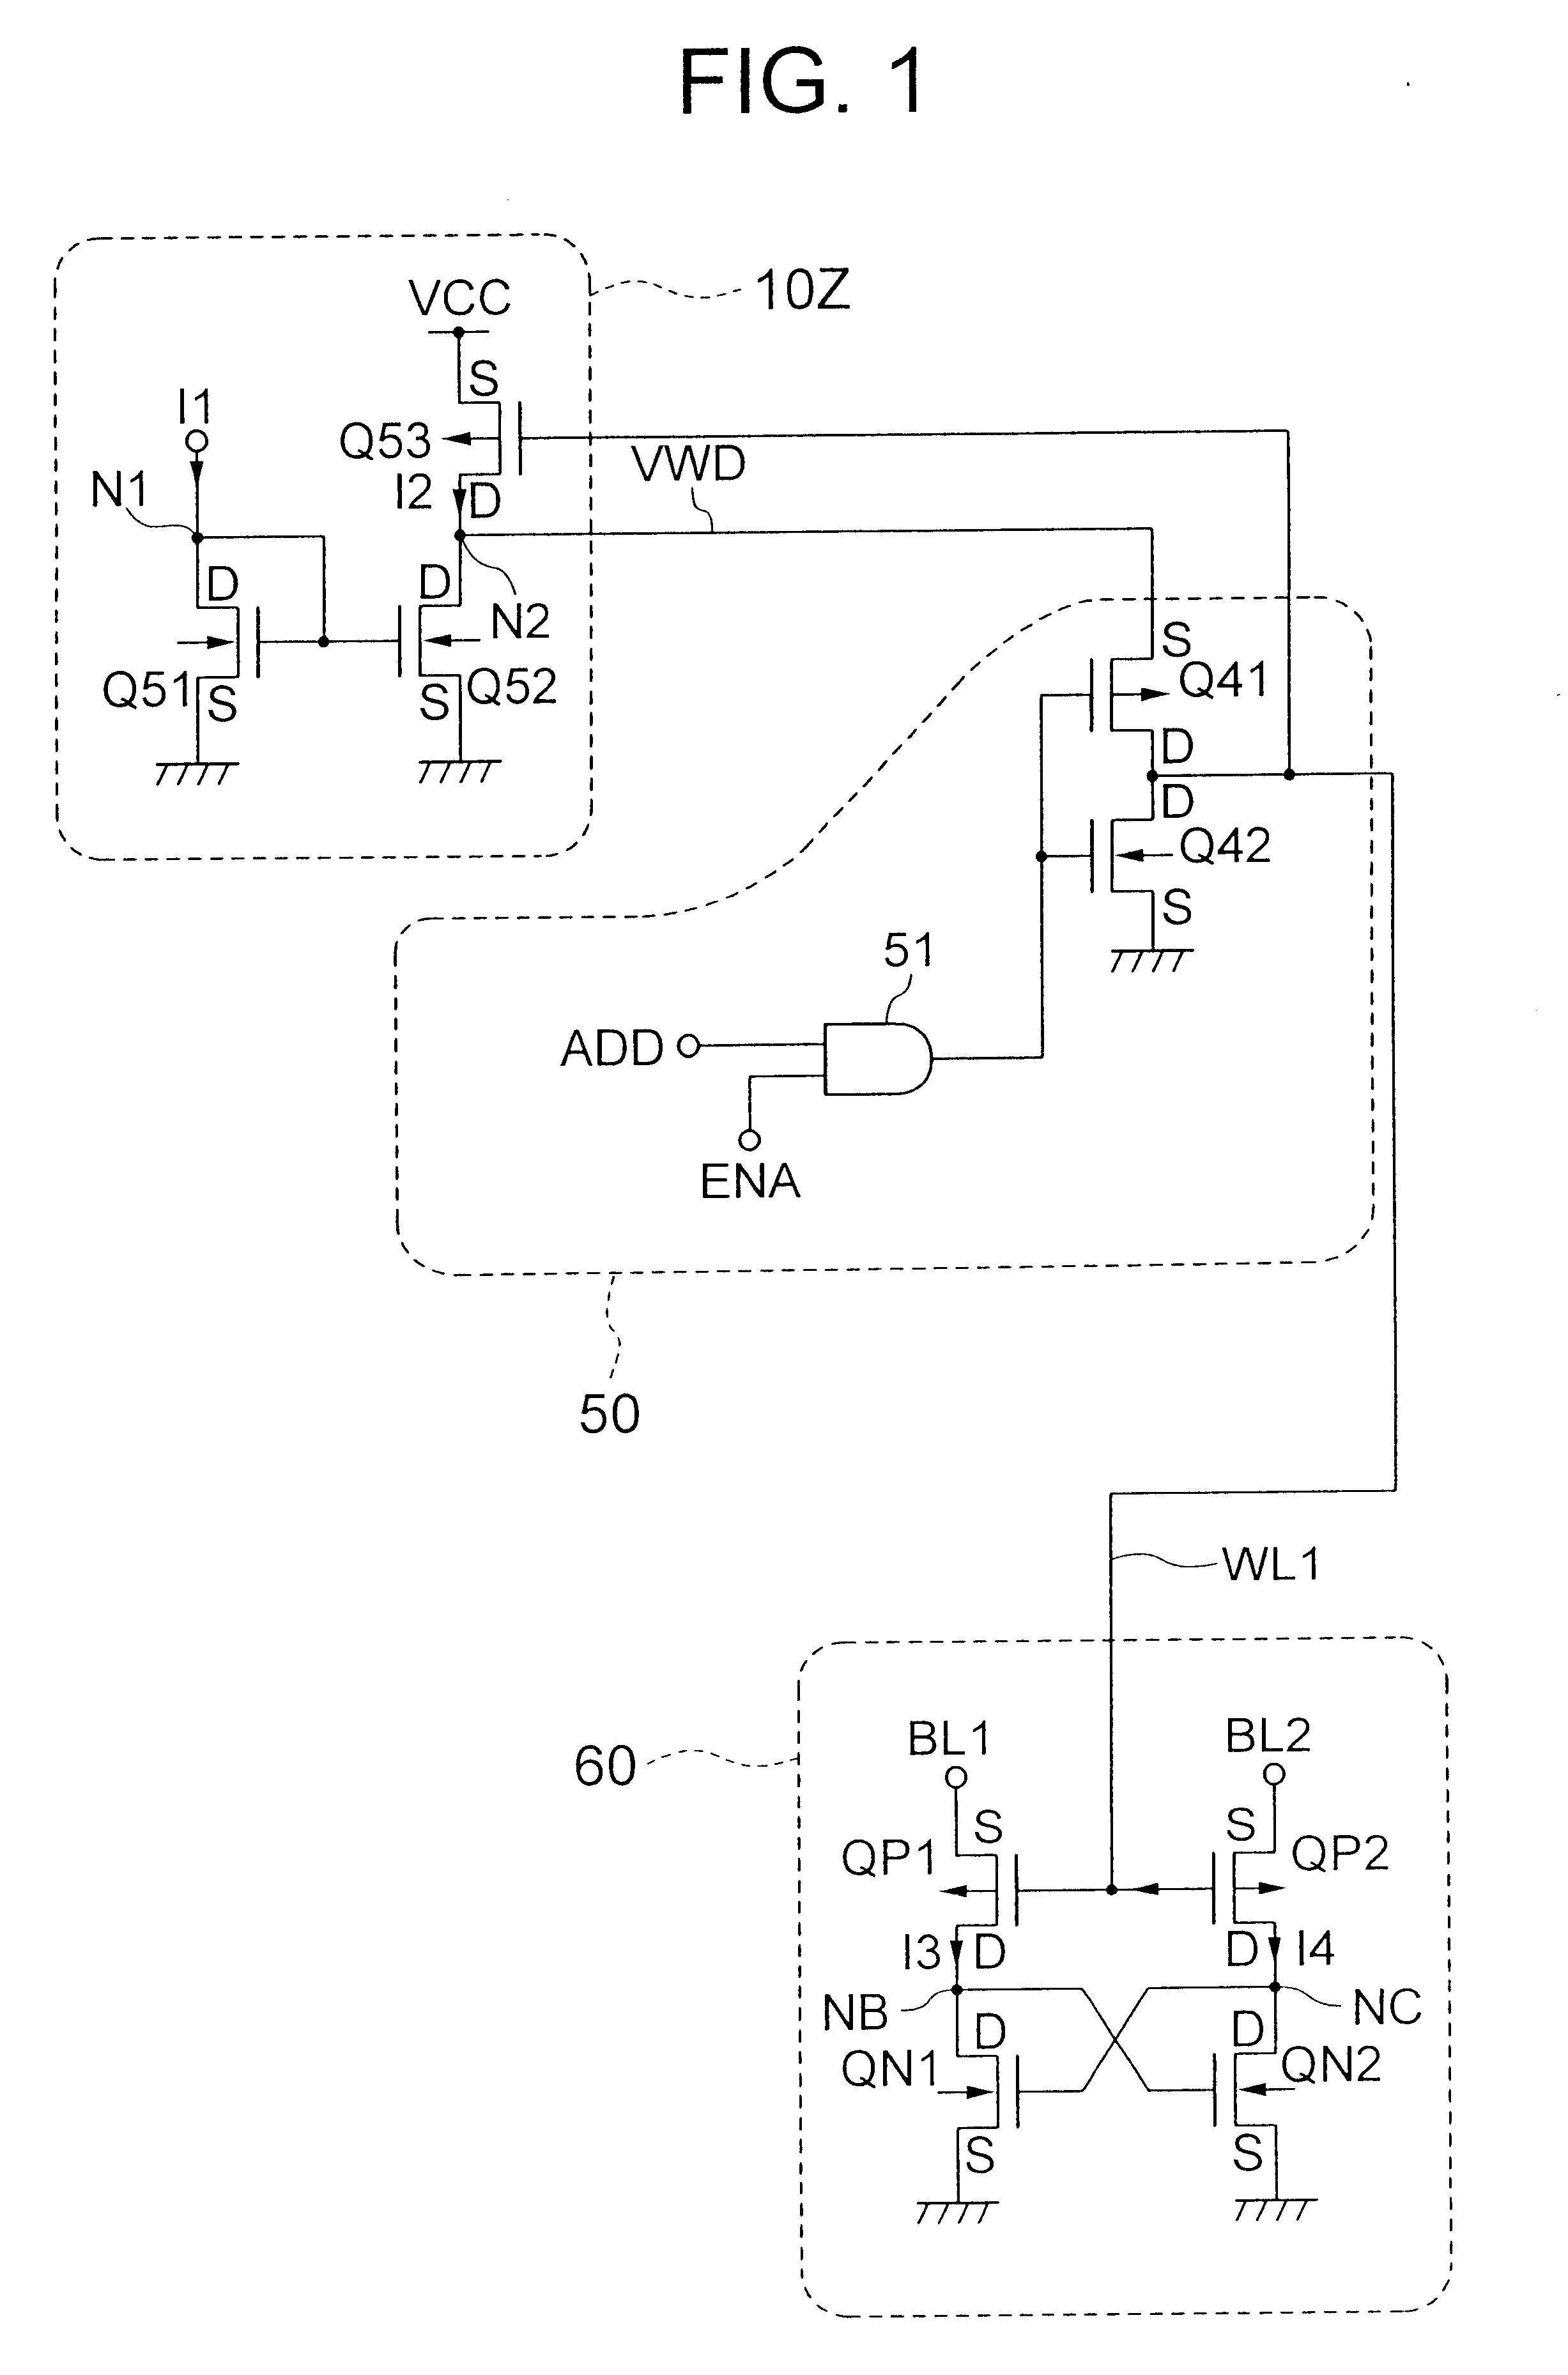 SRAM operating with a reduced power dissipation